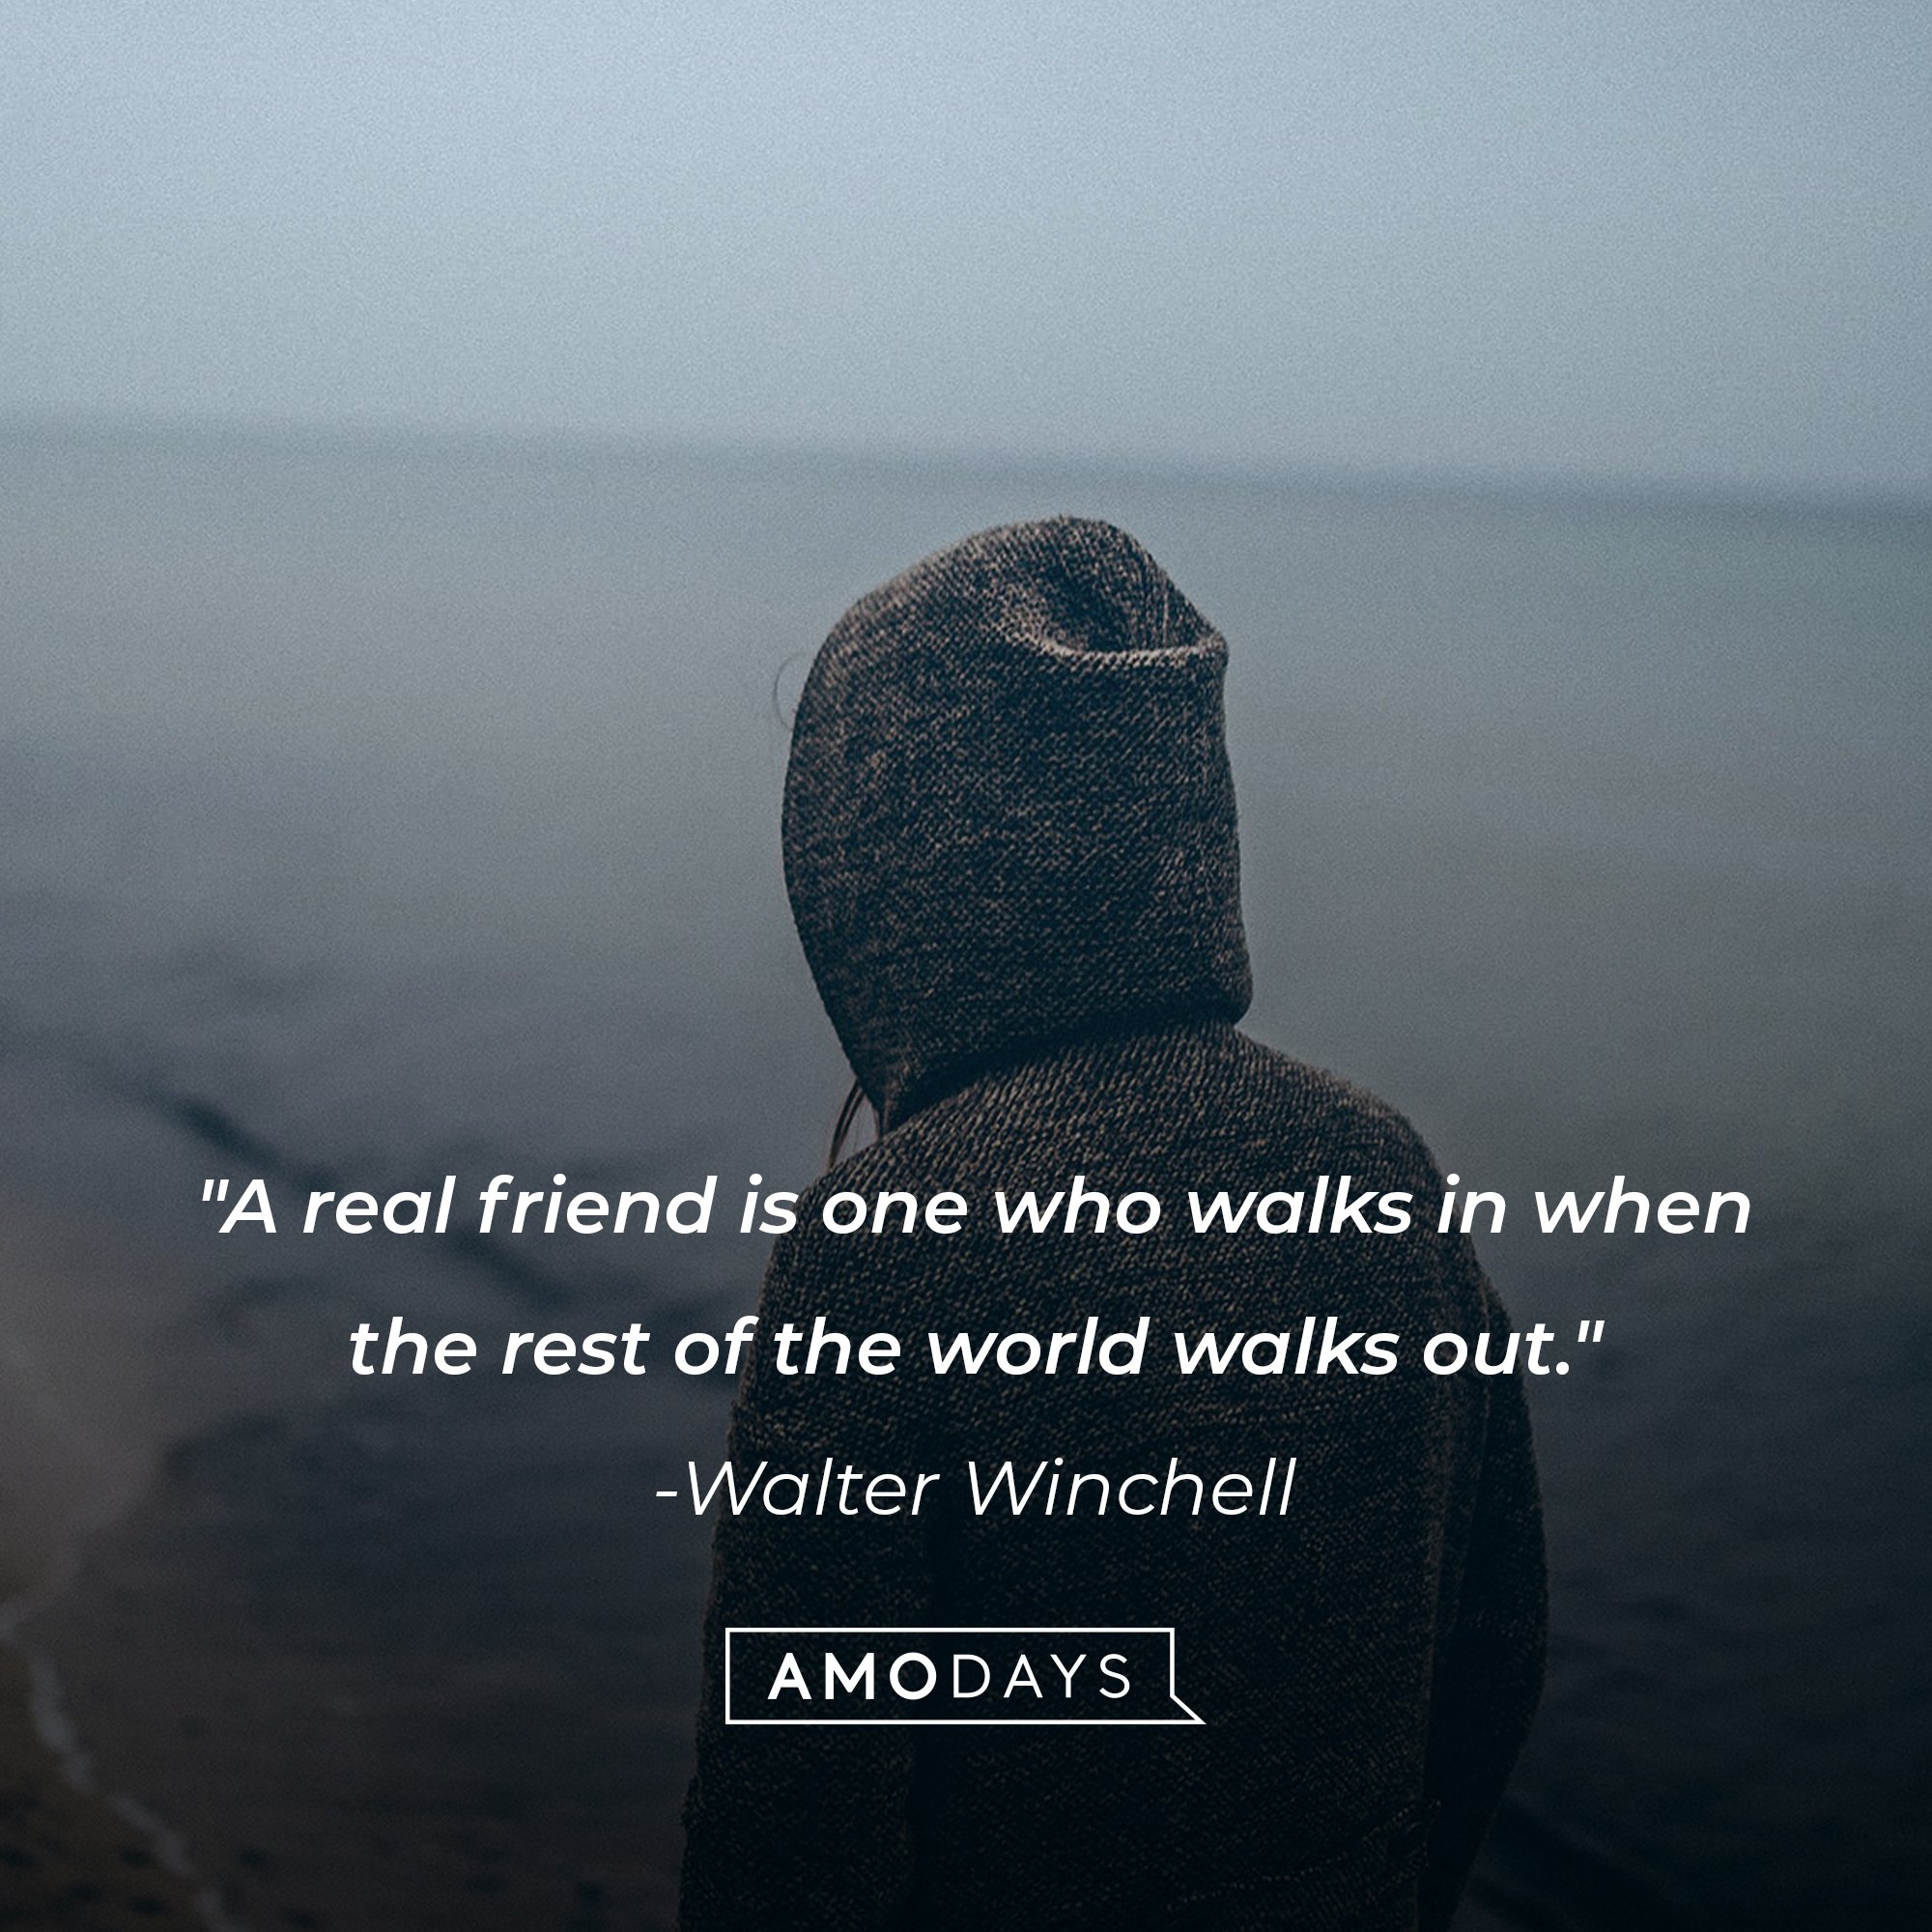  Walter Winchell’s quote: "A real friend is one who walks in when the rest of the world walks out." | Image: AmoDays 